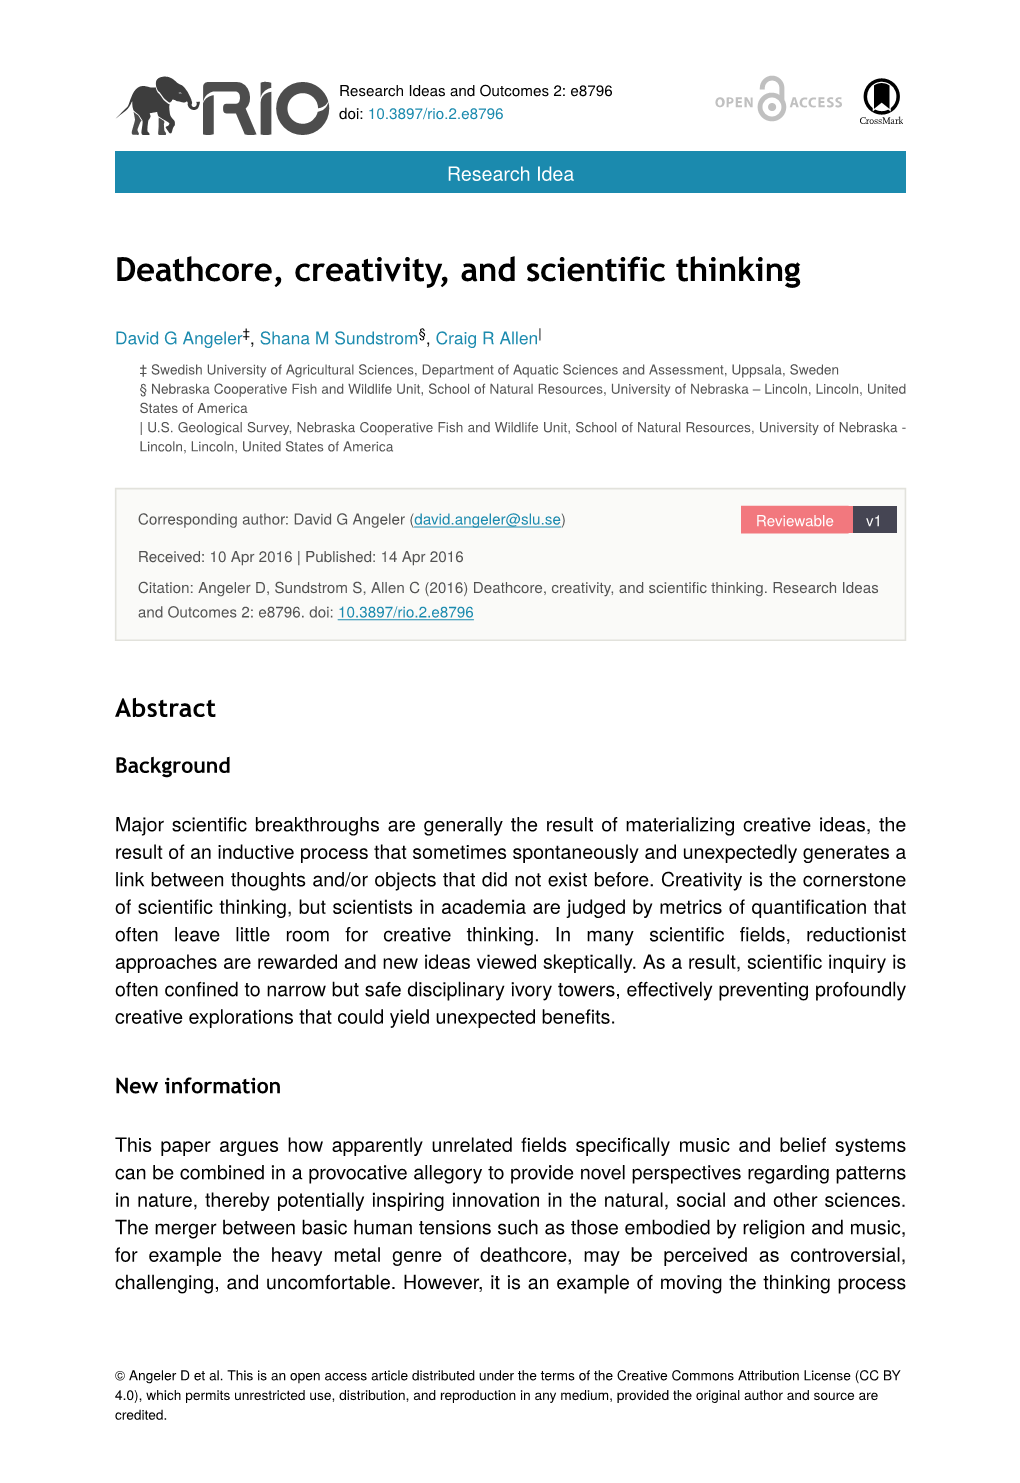 Deathcore, Creativity, and Scientific Thinking